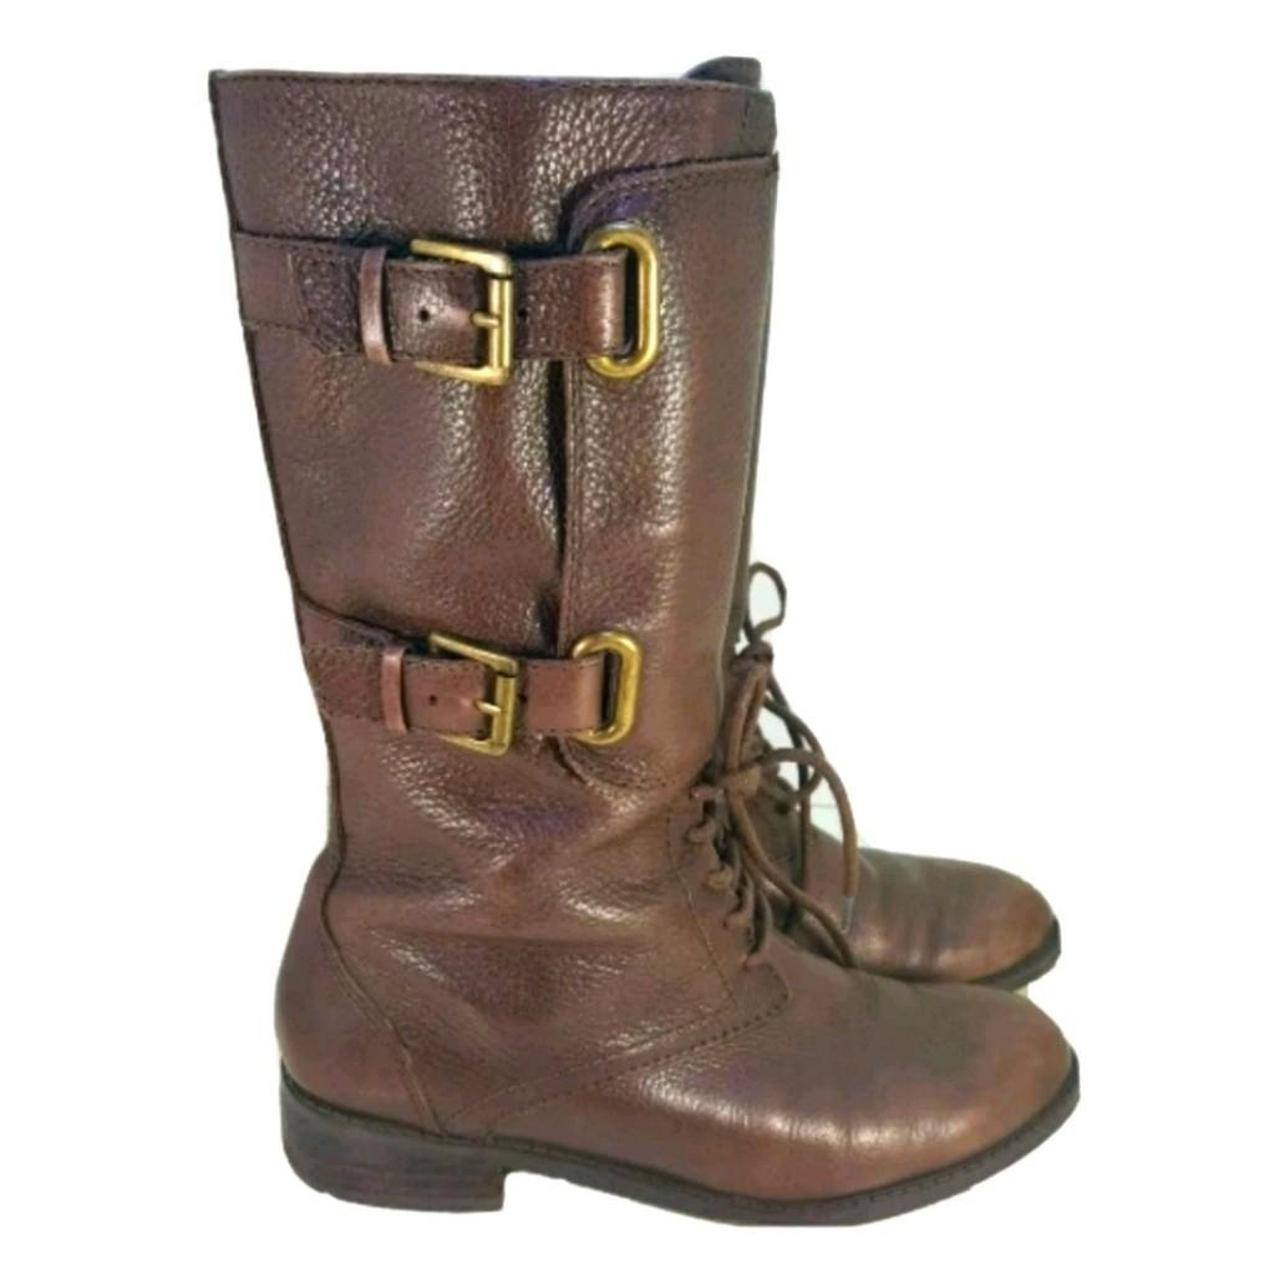 Enzo Angiolini Women's Brown Leather Mid Calf Boots... - Depop